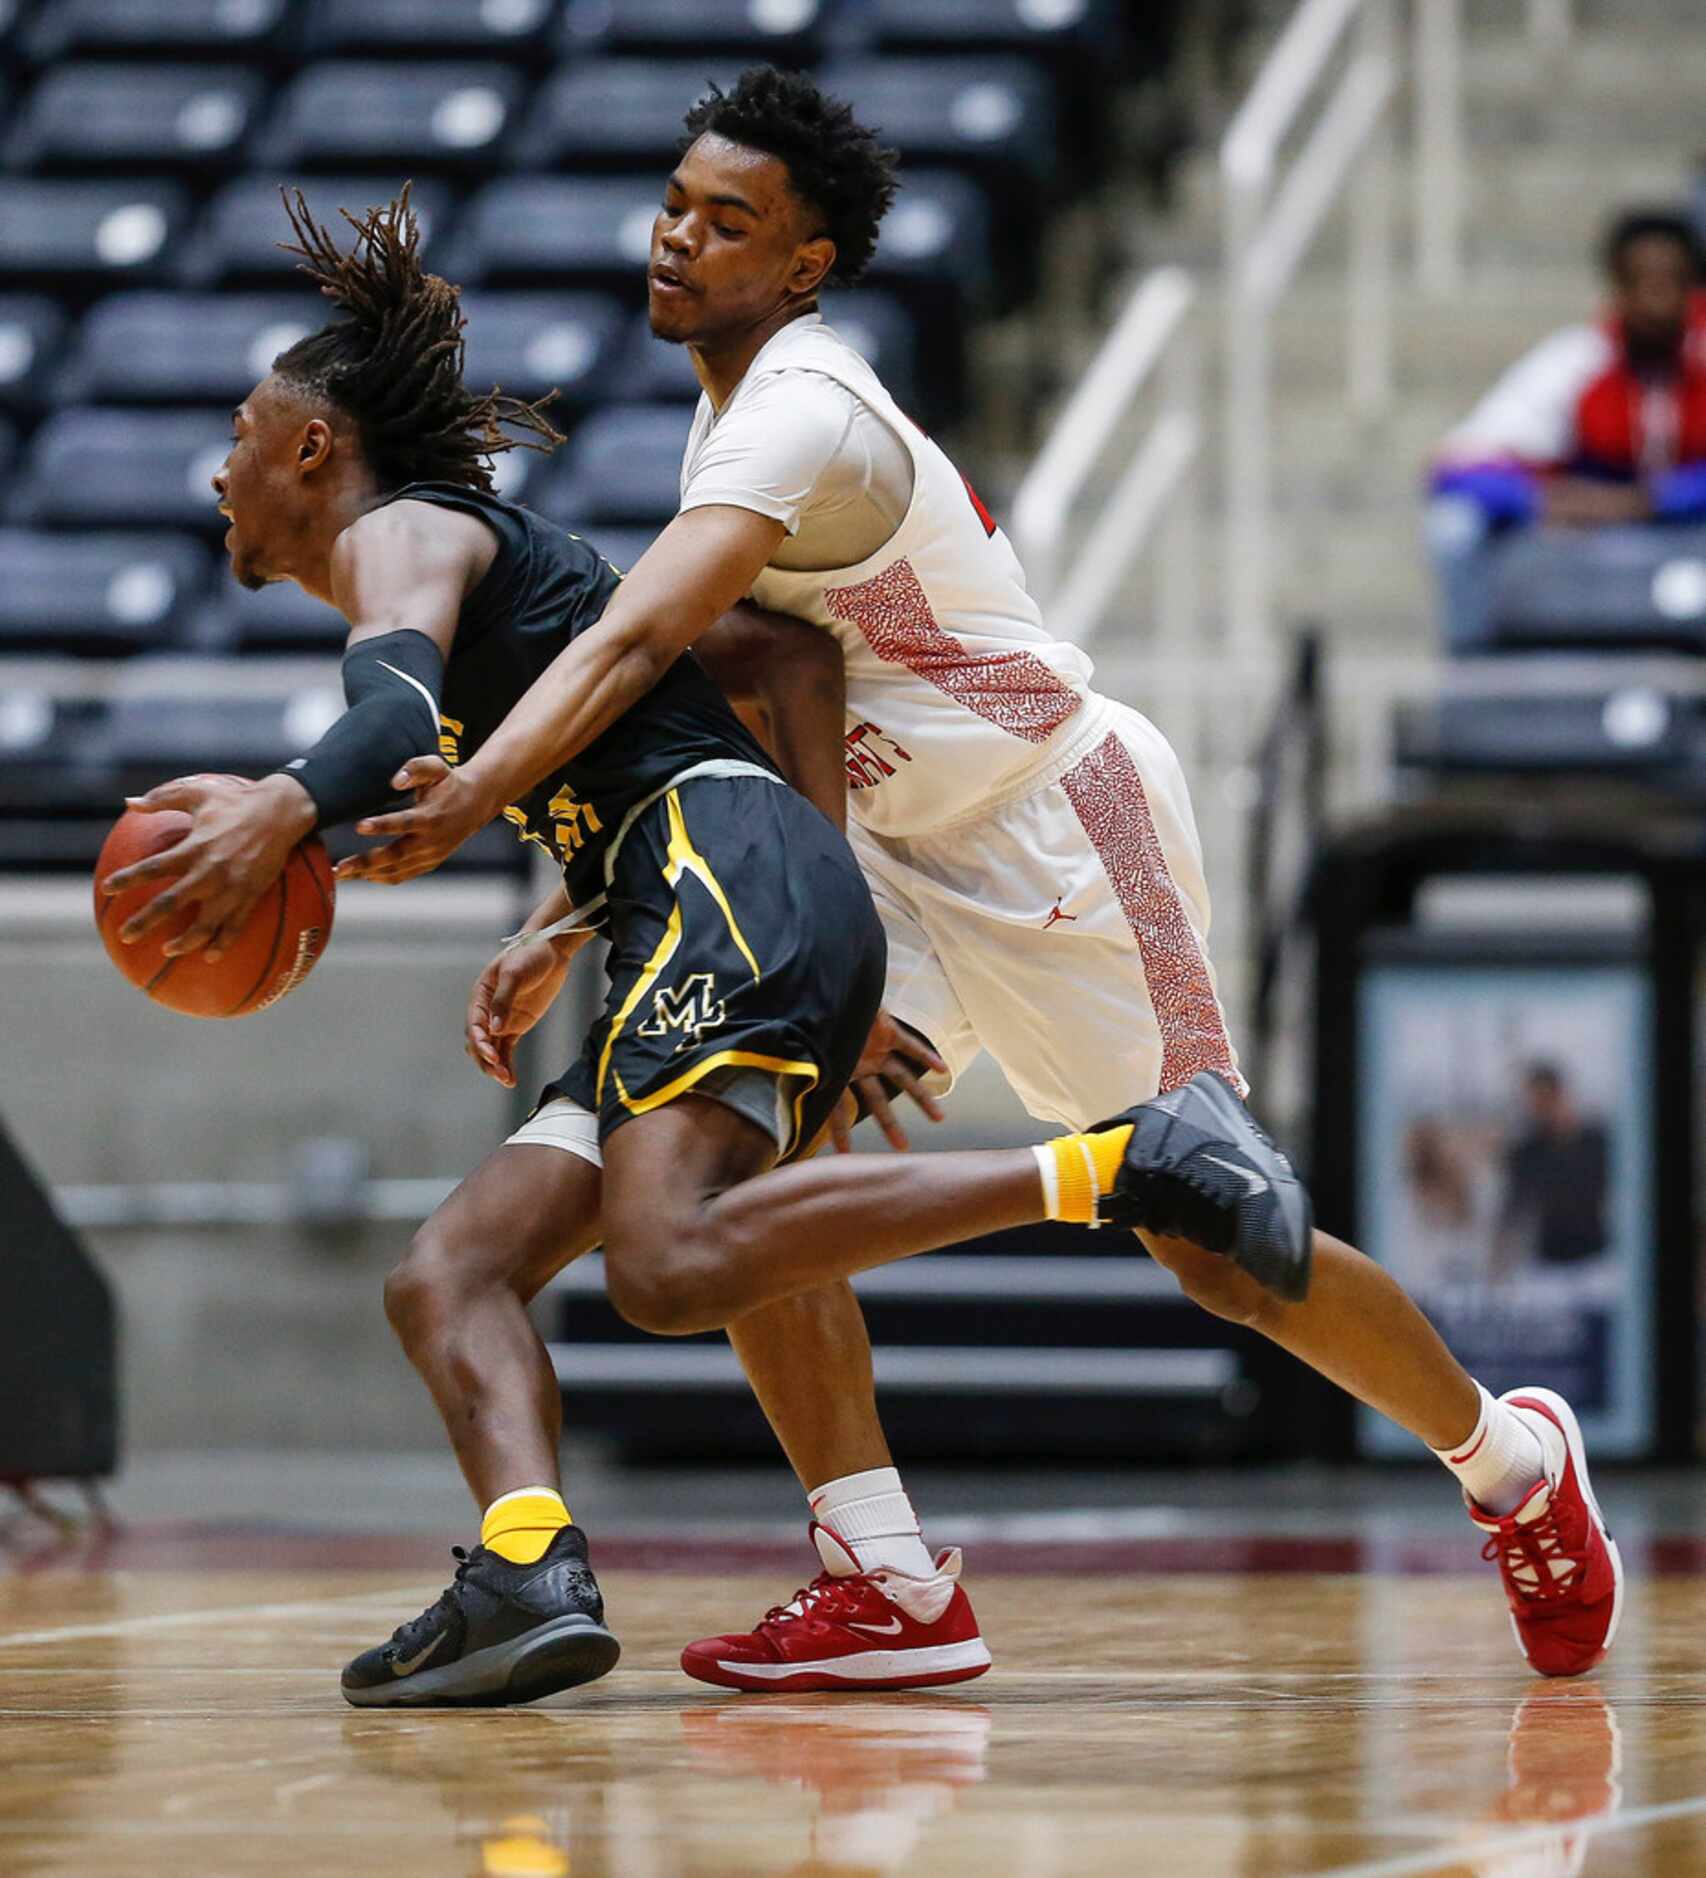 Kimball's Marcus Bonner (25) applies pressure as Mount Pleasant's Jamarion Brown (11) drives...